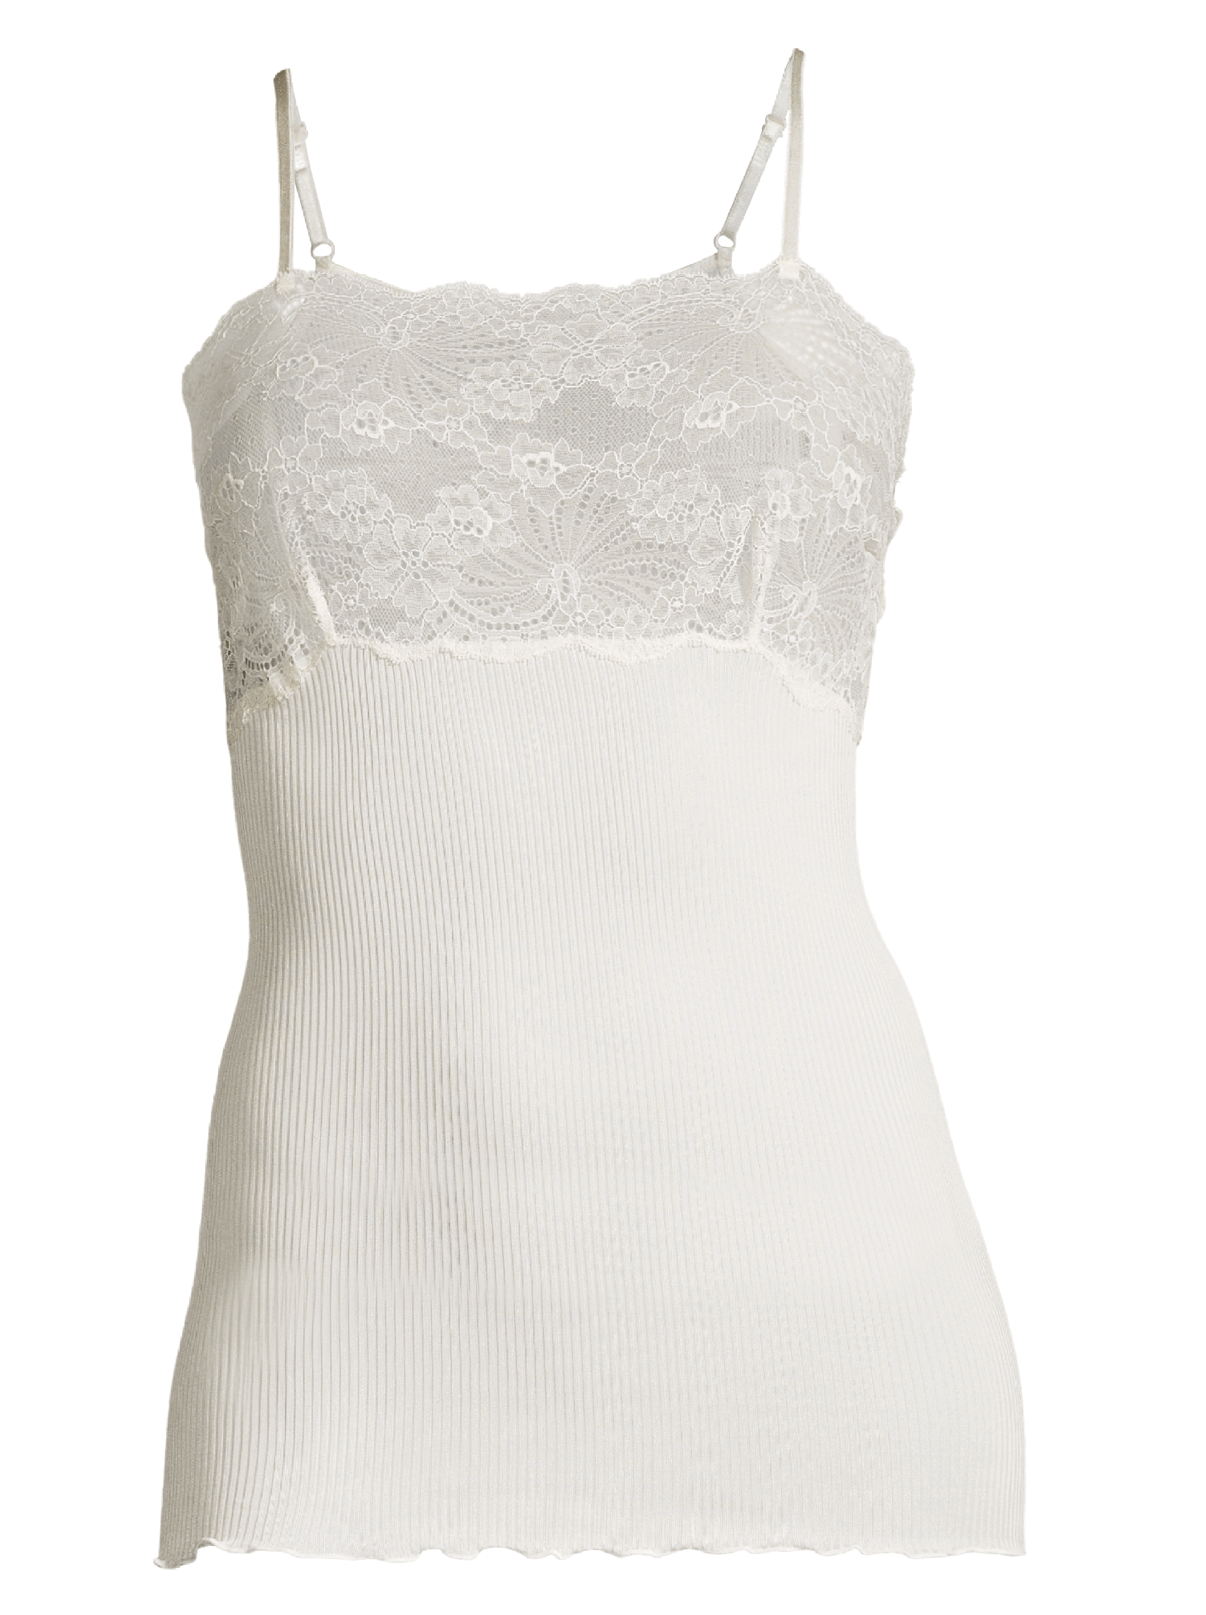 Silk Cashmere Tank Top in Lacy Pointelle, Ivory Camisole, Sheer